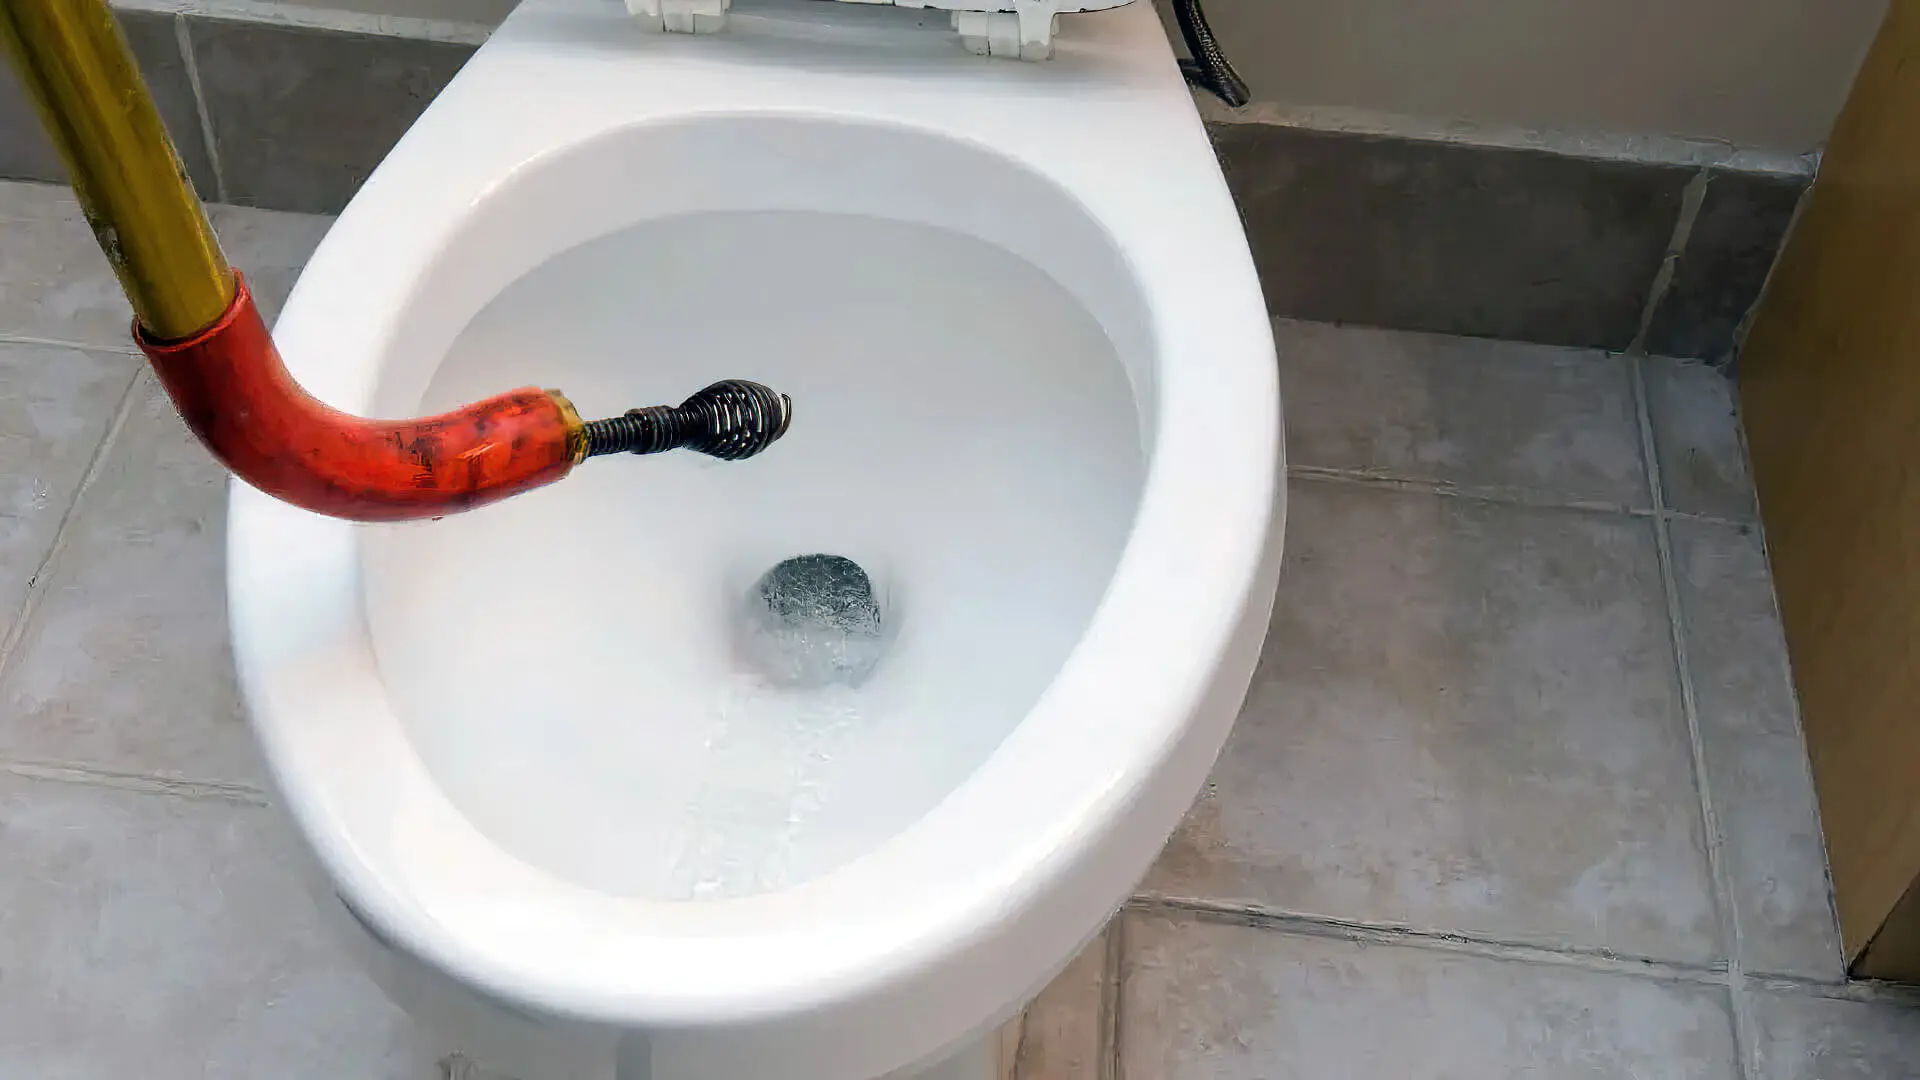 How to Use a Drain Snake to Unclog Your Toilet